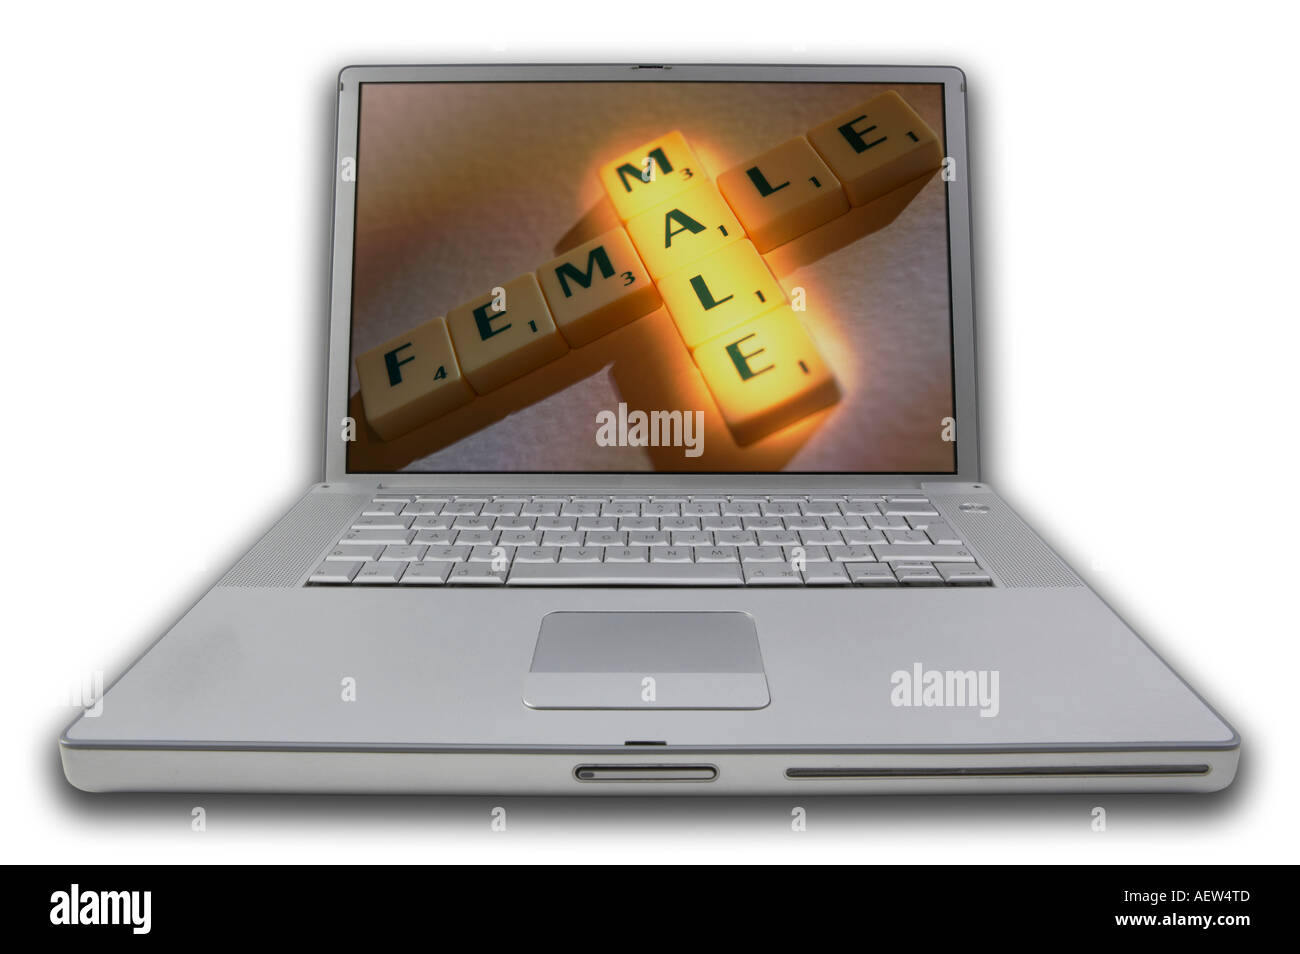 LAP TOP COMPUTER WITH SCRABBLE LETTERS ON SCREEN SPELLING WORDS MALE FEMALE Stock Photo